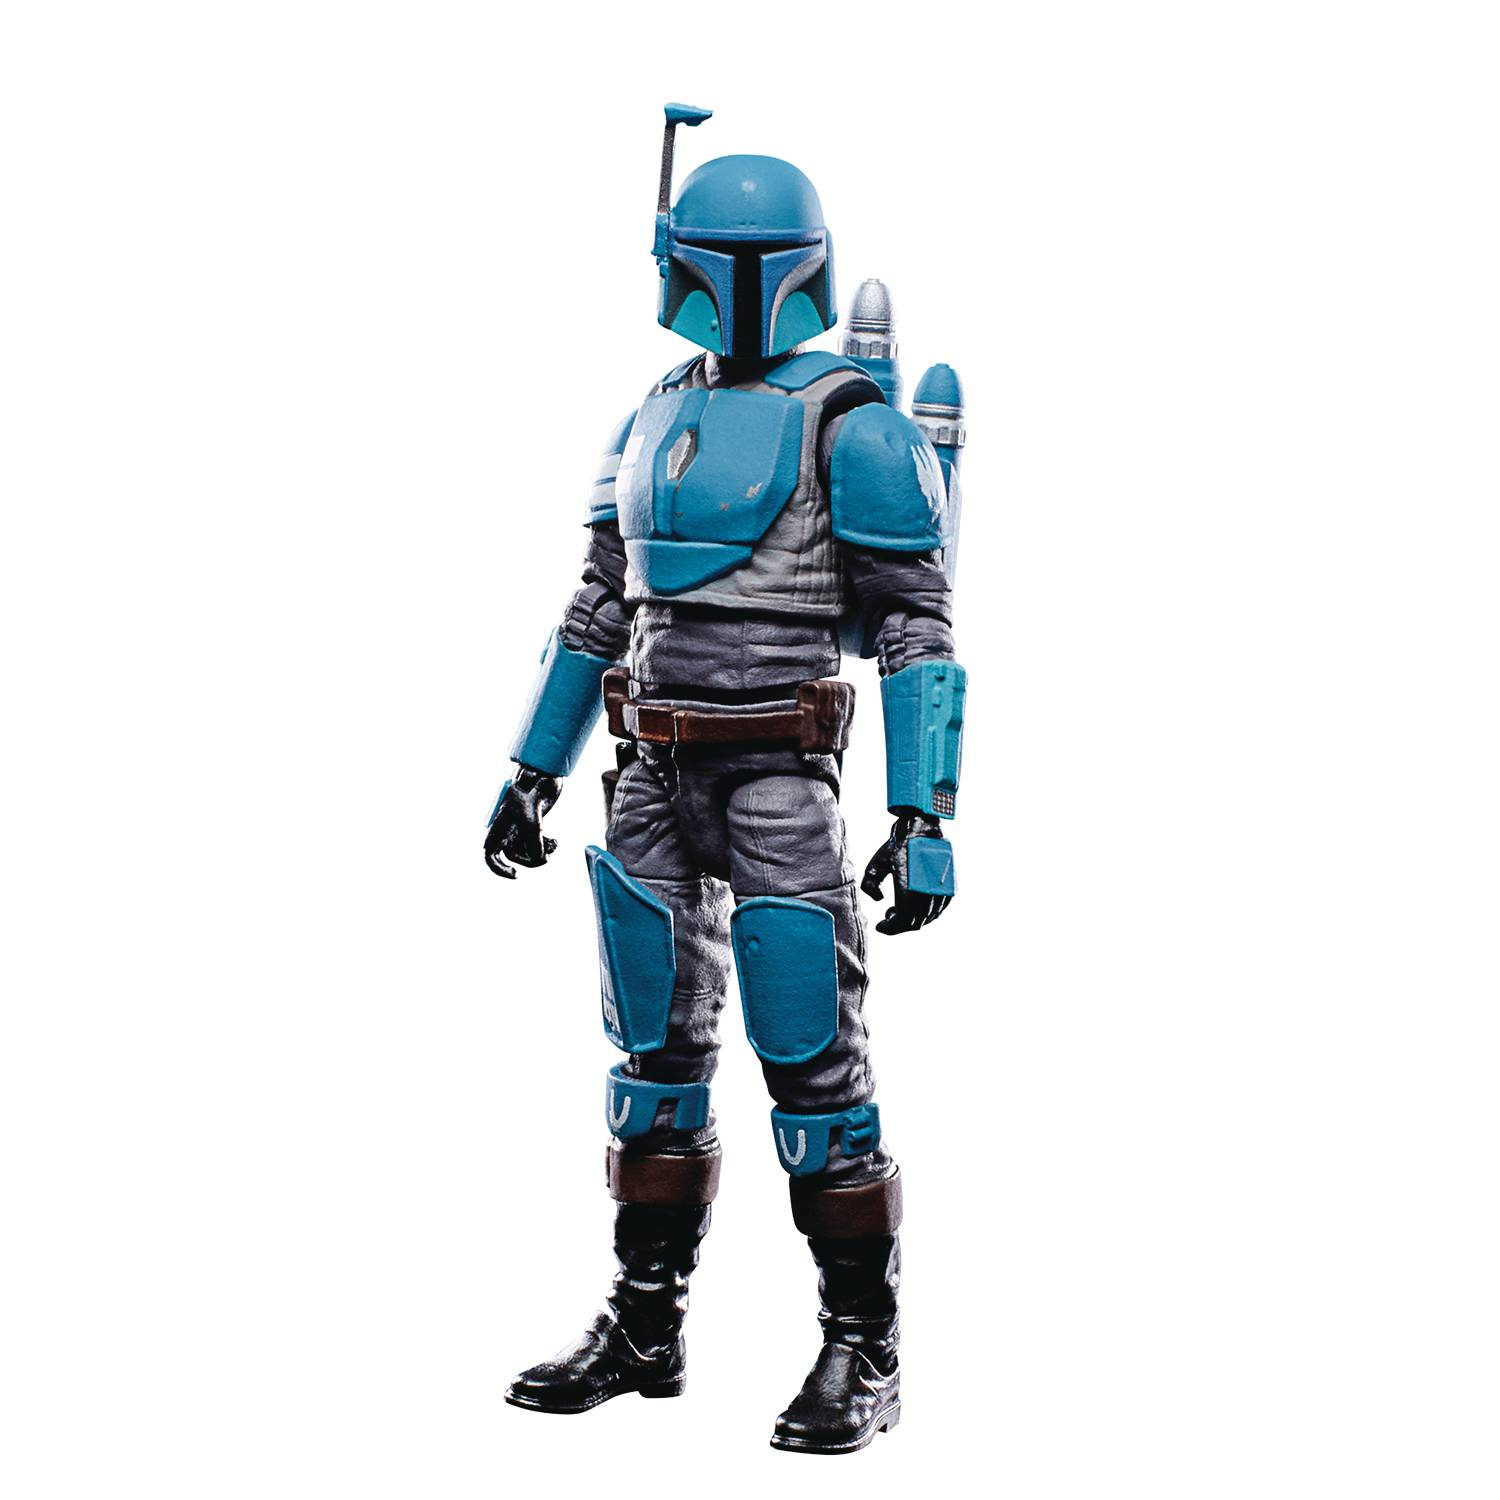 Star Wars - The Vintage Collection - The Mandalorian - Death Watch Mandalorian 3.75inch Action Figure